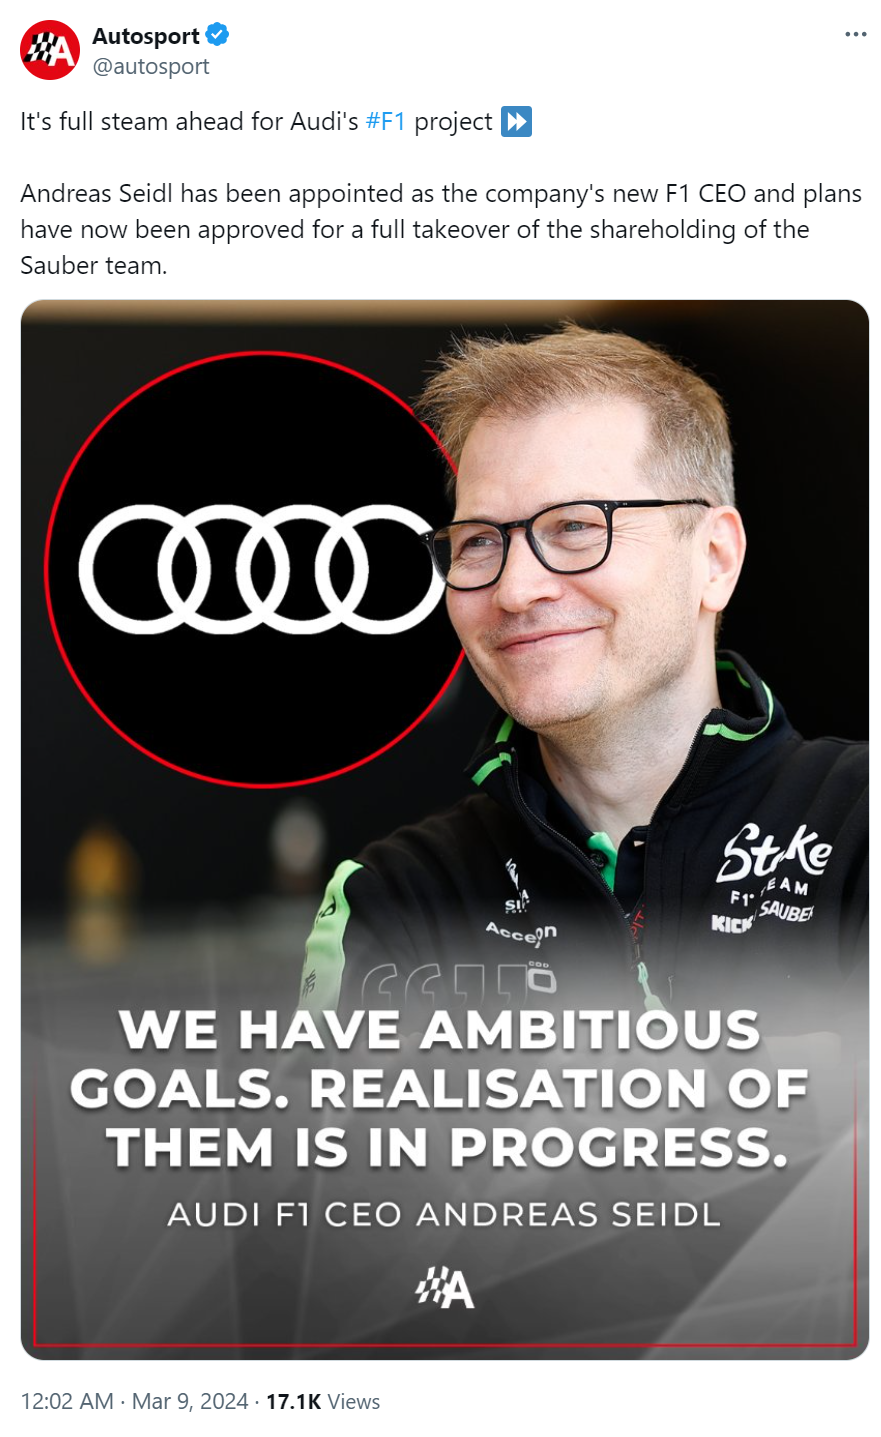 Autosport's tweet on March 9 about Andreas Seidl. /@autosport